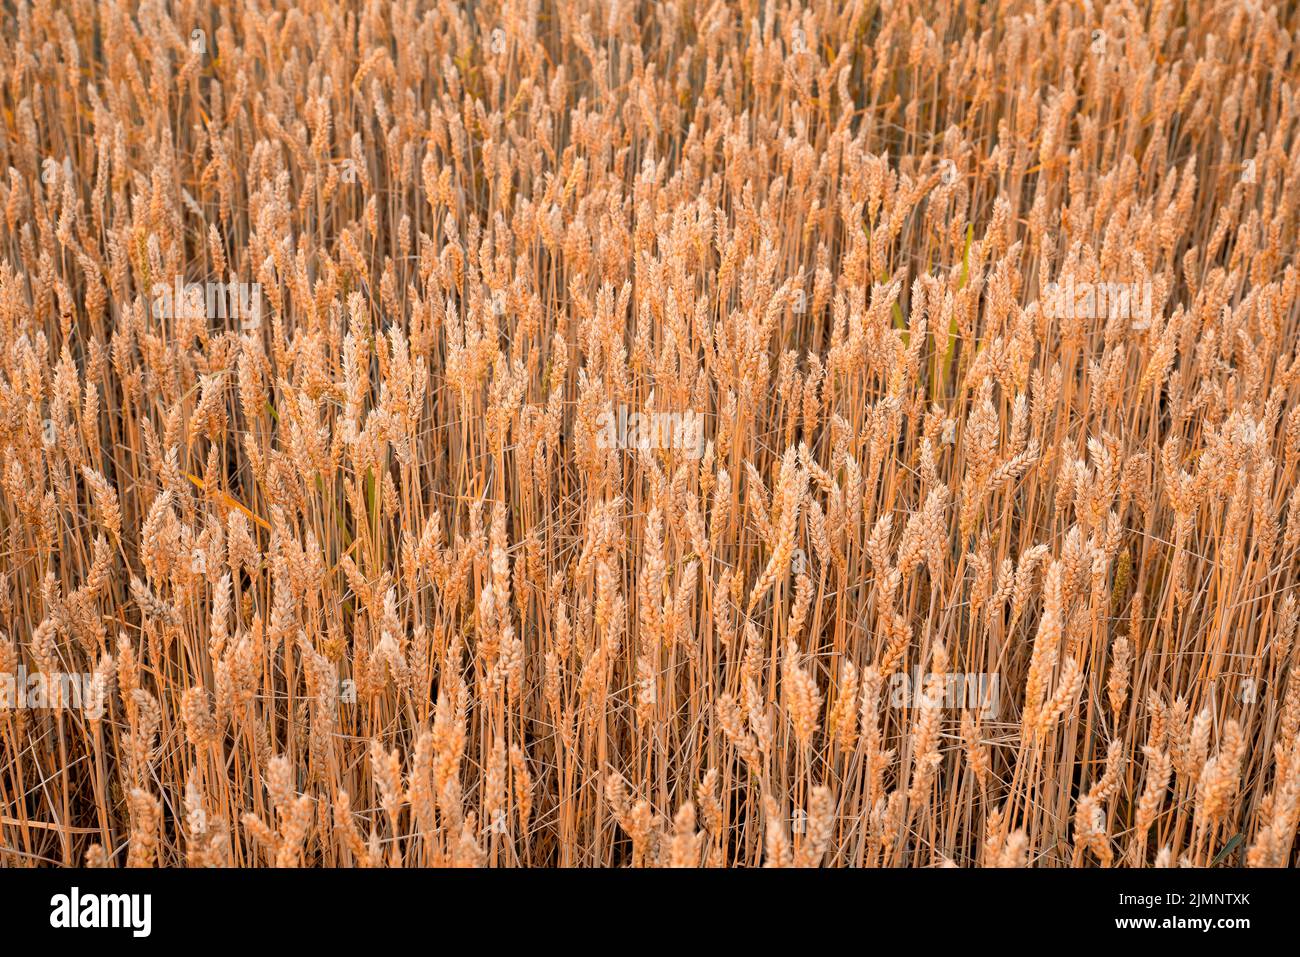 Concept of rich harvest. Wheat field ready for harvest. Stock Photo